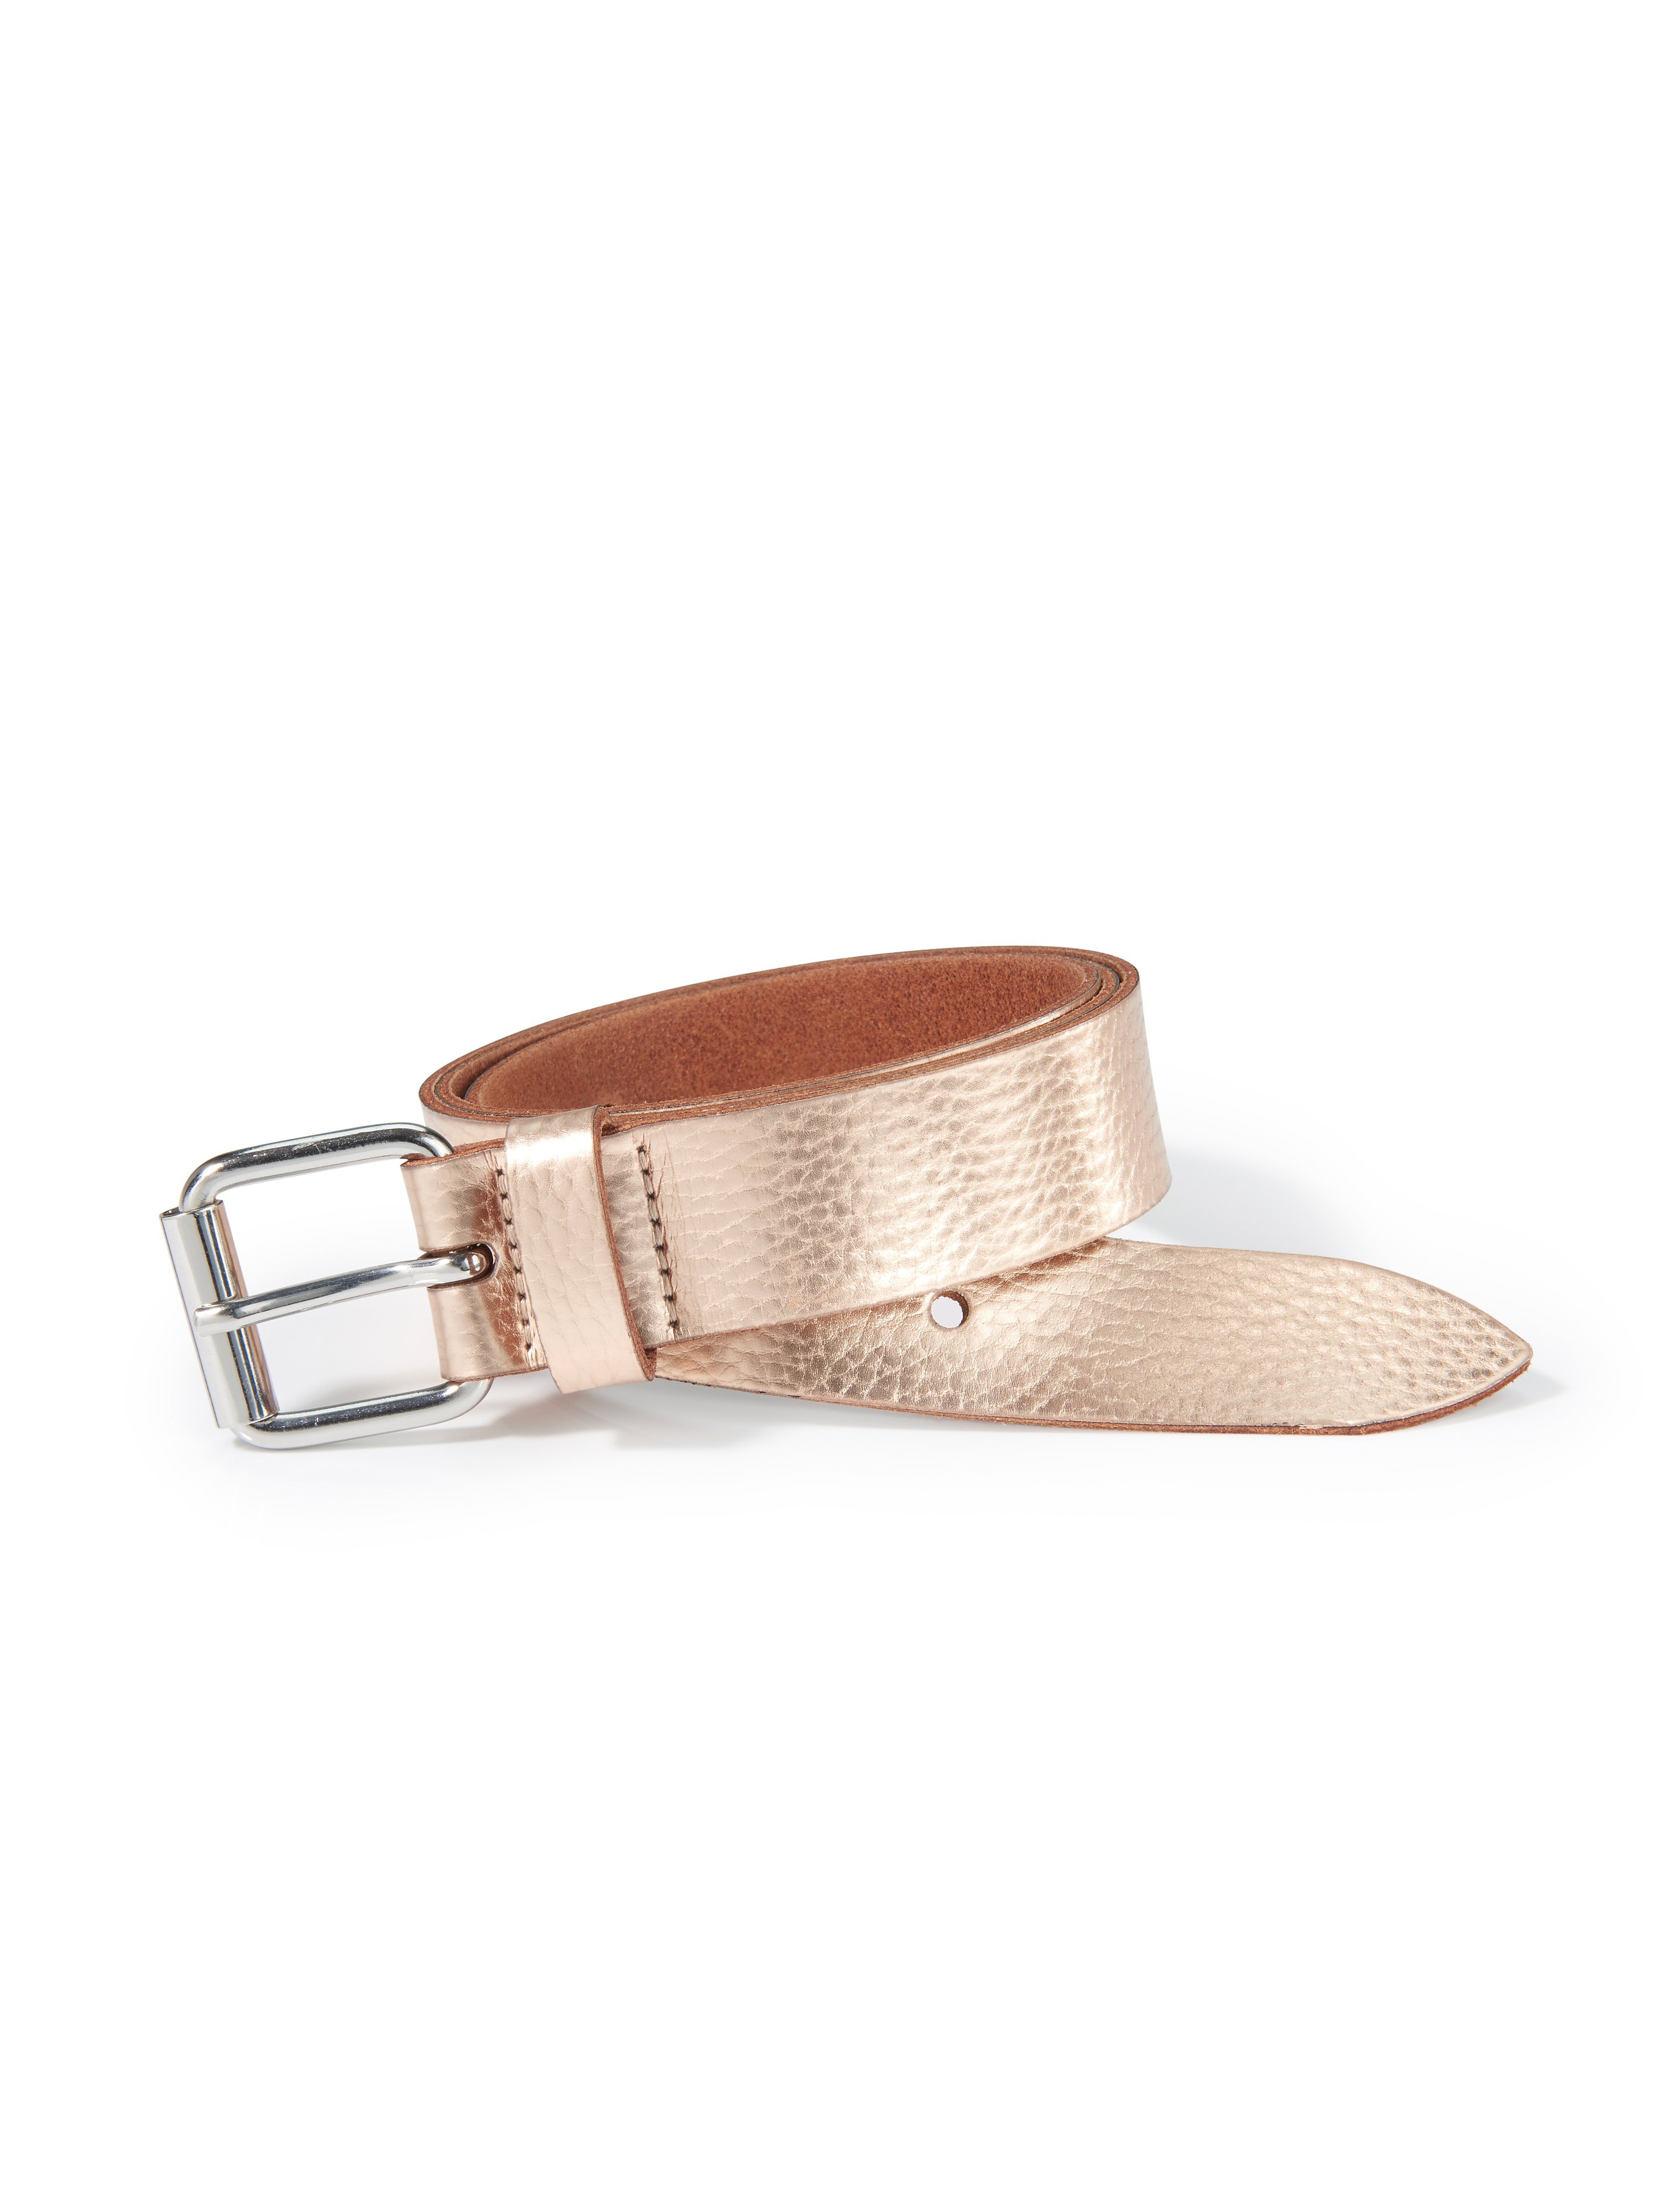 Nappa leather belt Peter Hahn pale pink